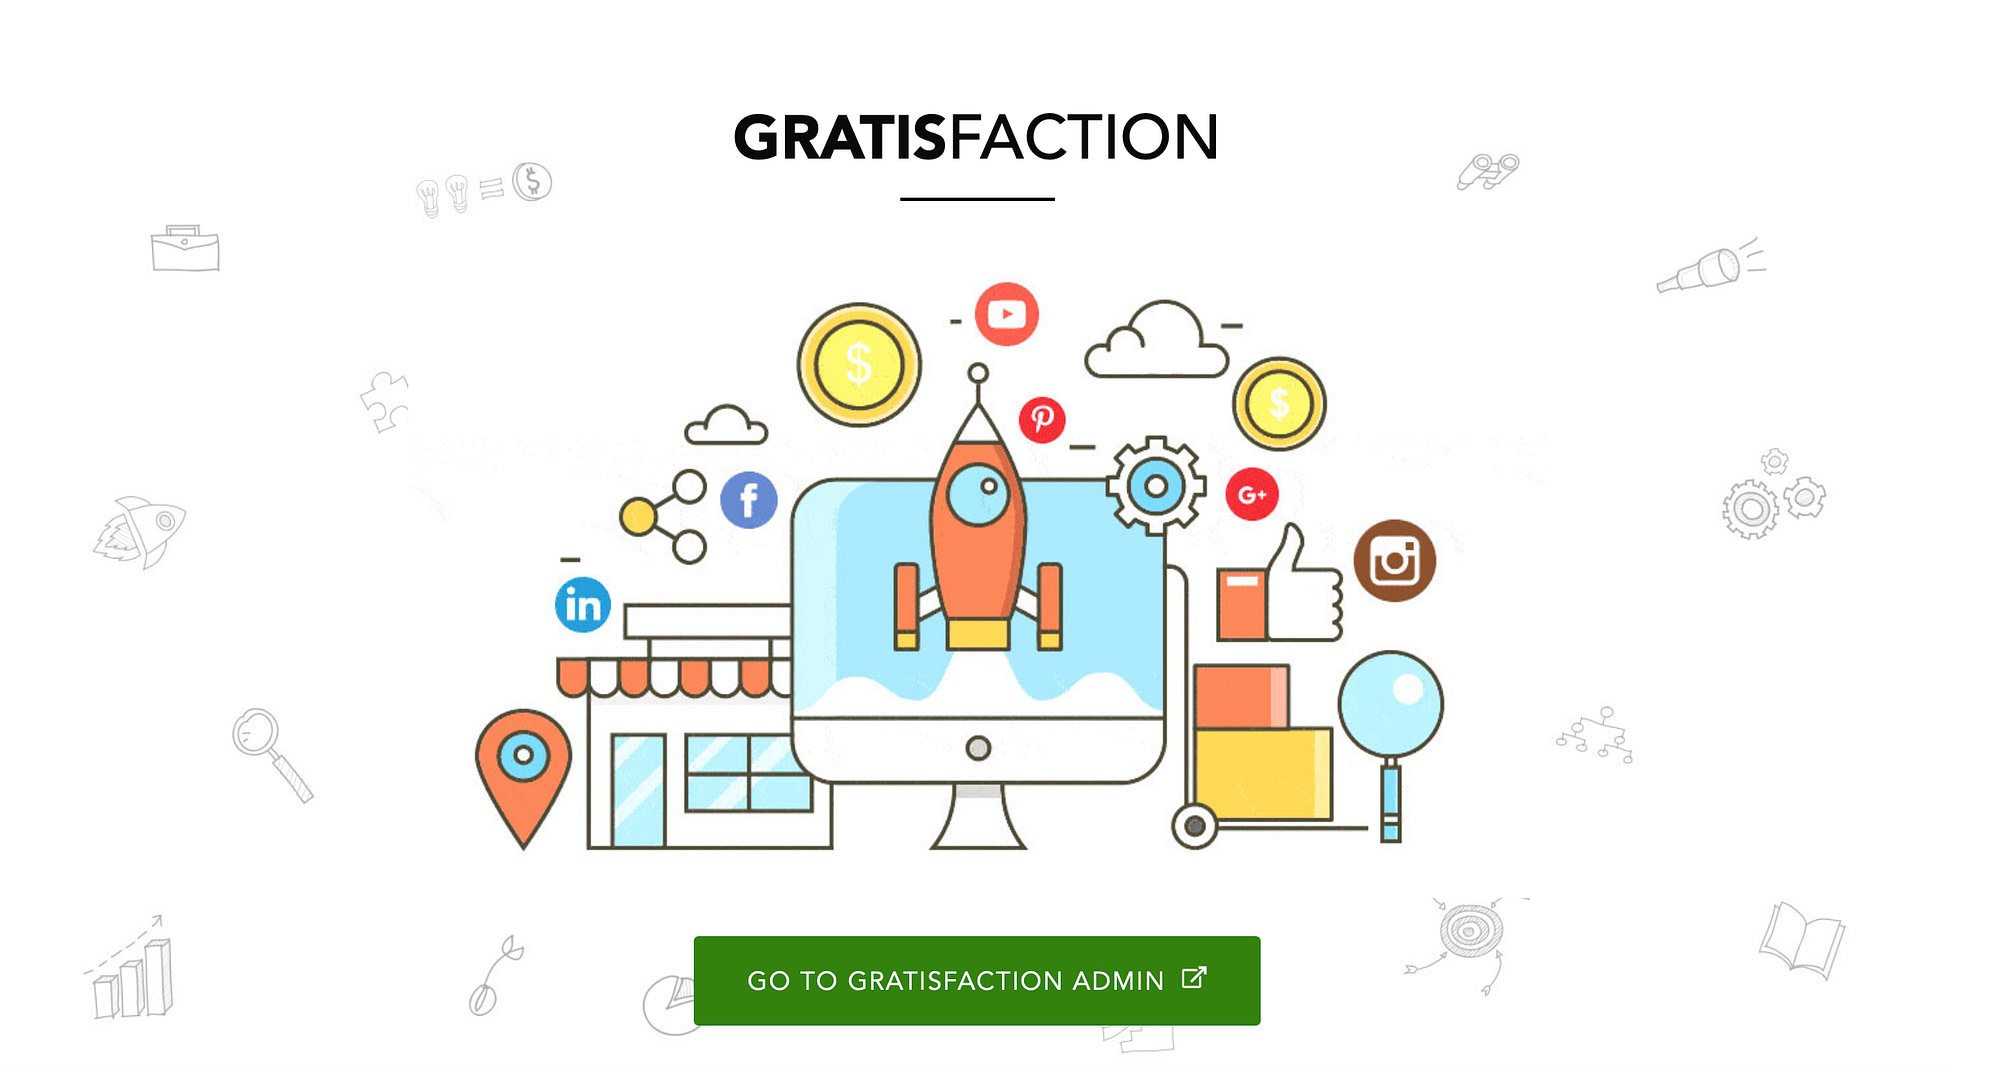 Go to Gratisfaction admin to set up a loyalty program.